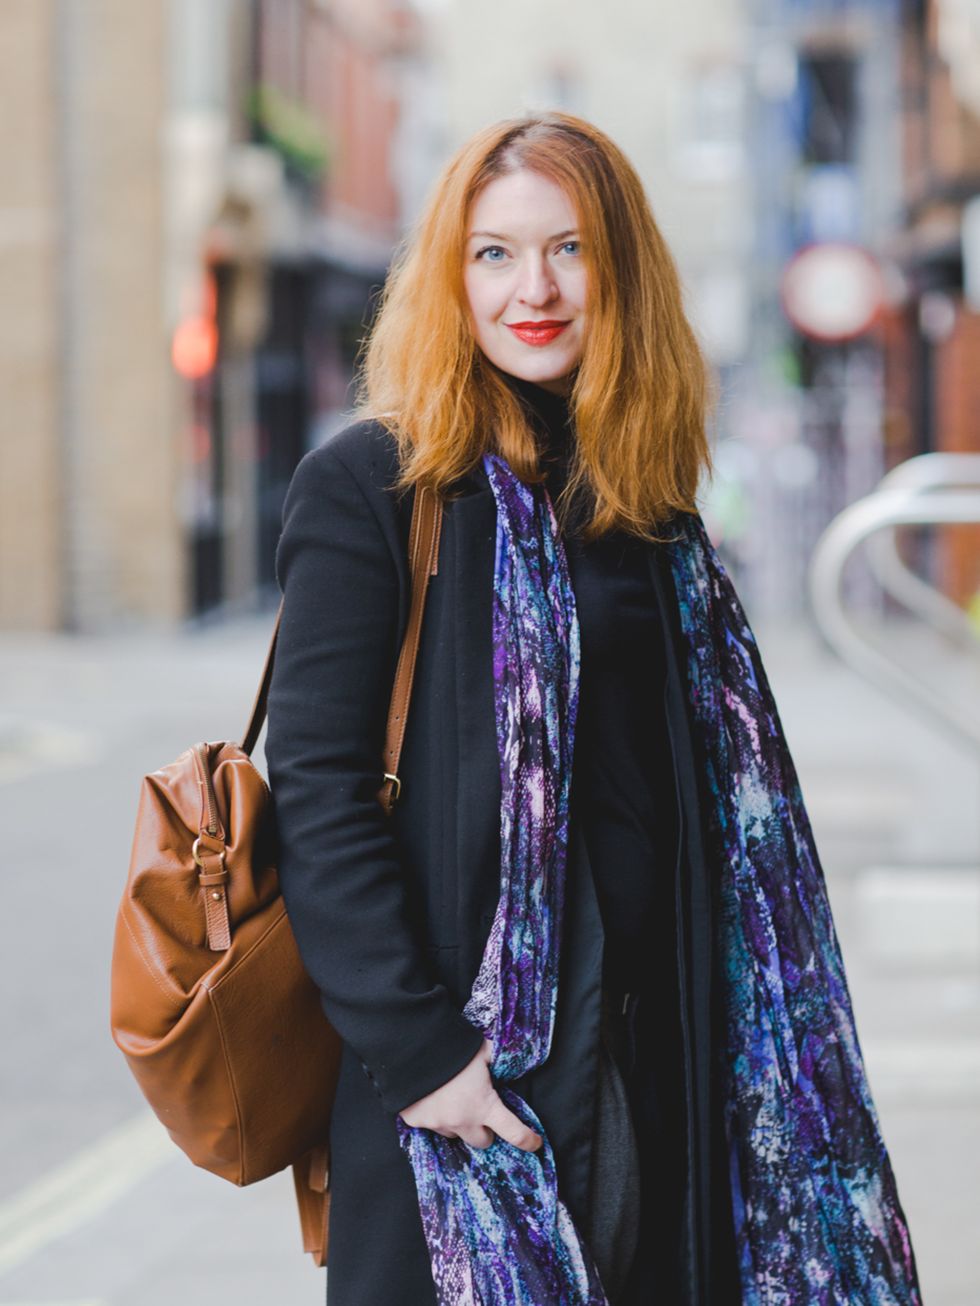 Natasha Pearlman - Deputy Editor.

Reiss coat, Marks & Spencer top, Lily and Lionel scarf, Asos backpack.